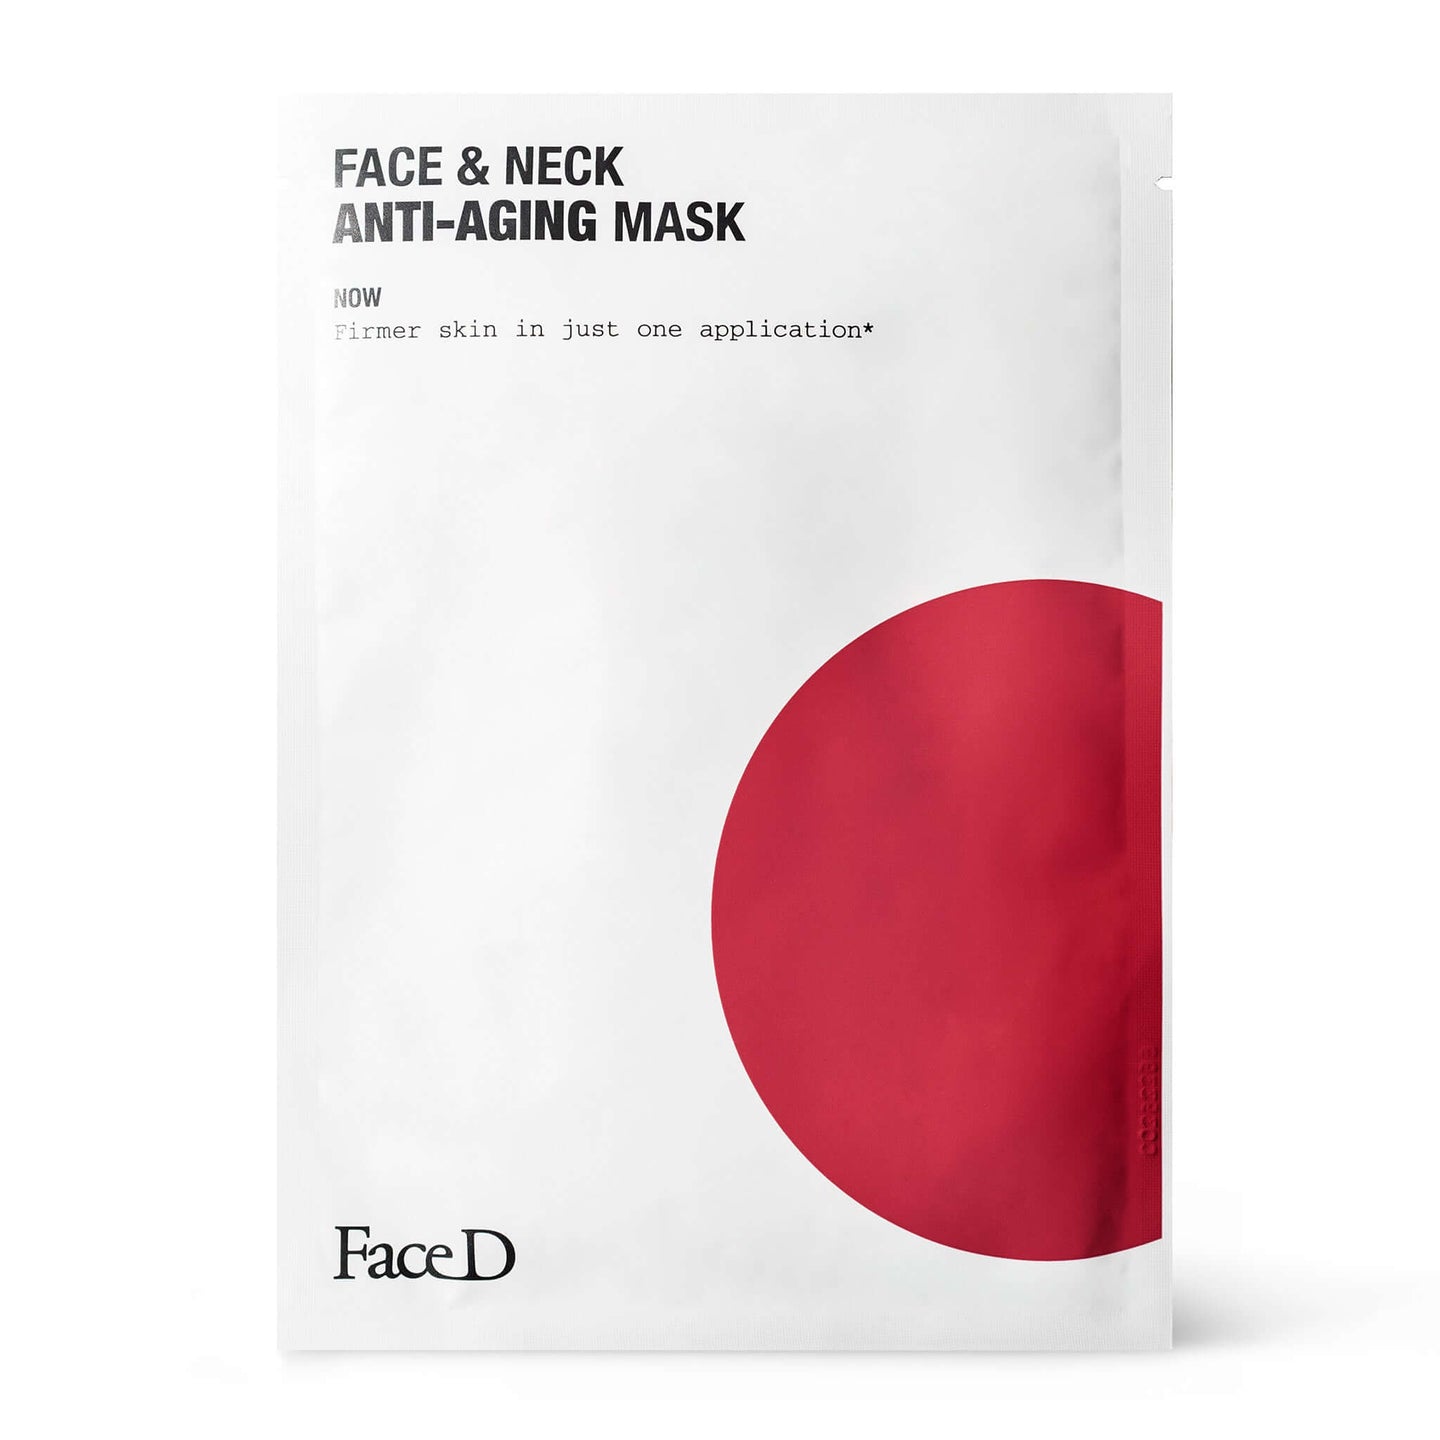 FACE & NECK ANTI-AGING MASK